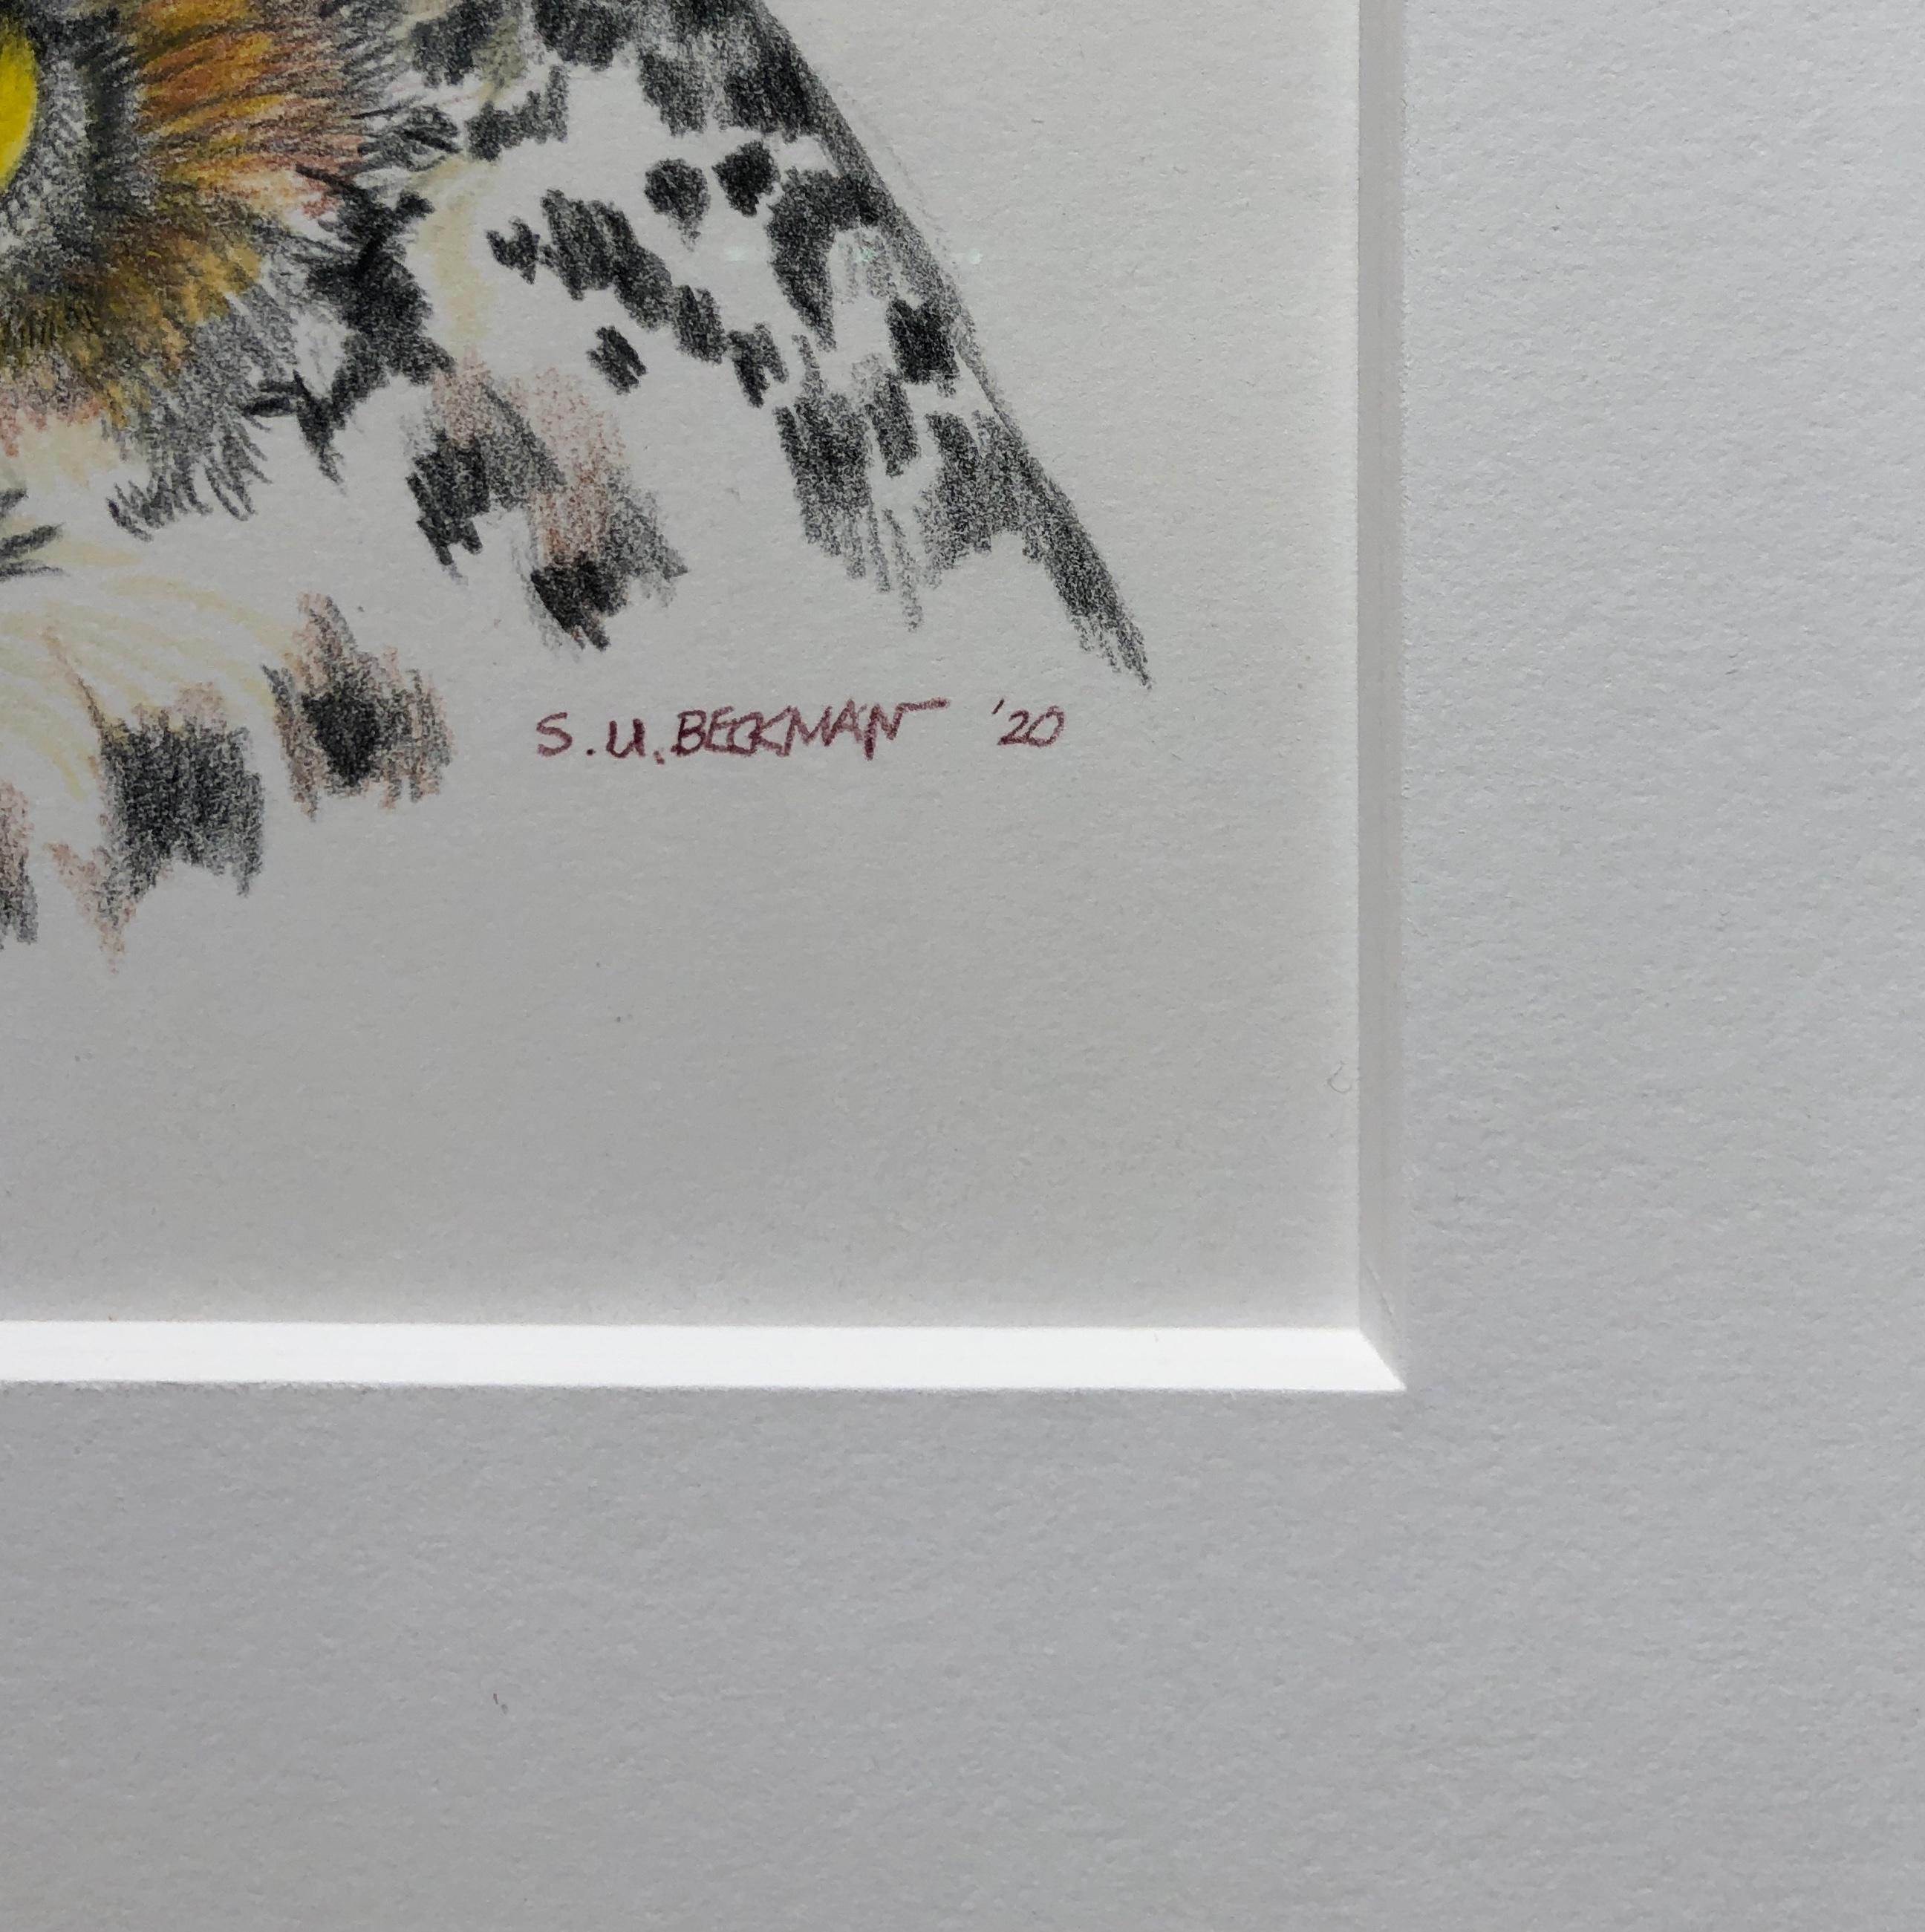 With its long, earlike tufts, intimidating yellow-eyed stare, and deep hooting voice, the Great Horned Owl is the quintessential owl of storybooks.  This detail color pencil drawing captures the eerie beauty that mother nature has given us.  This